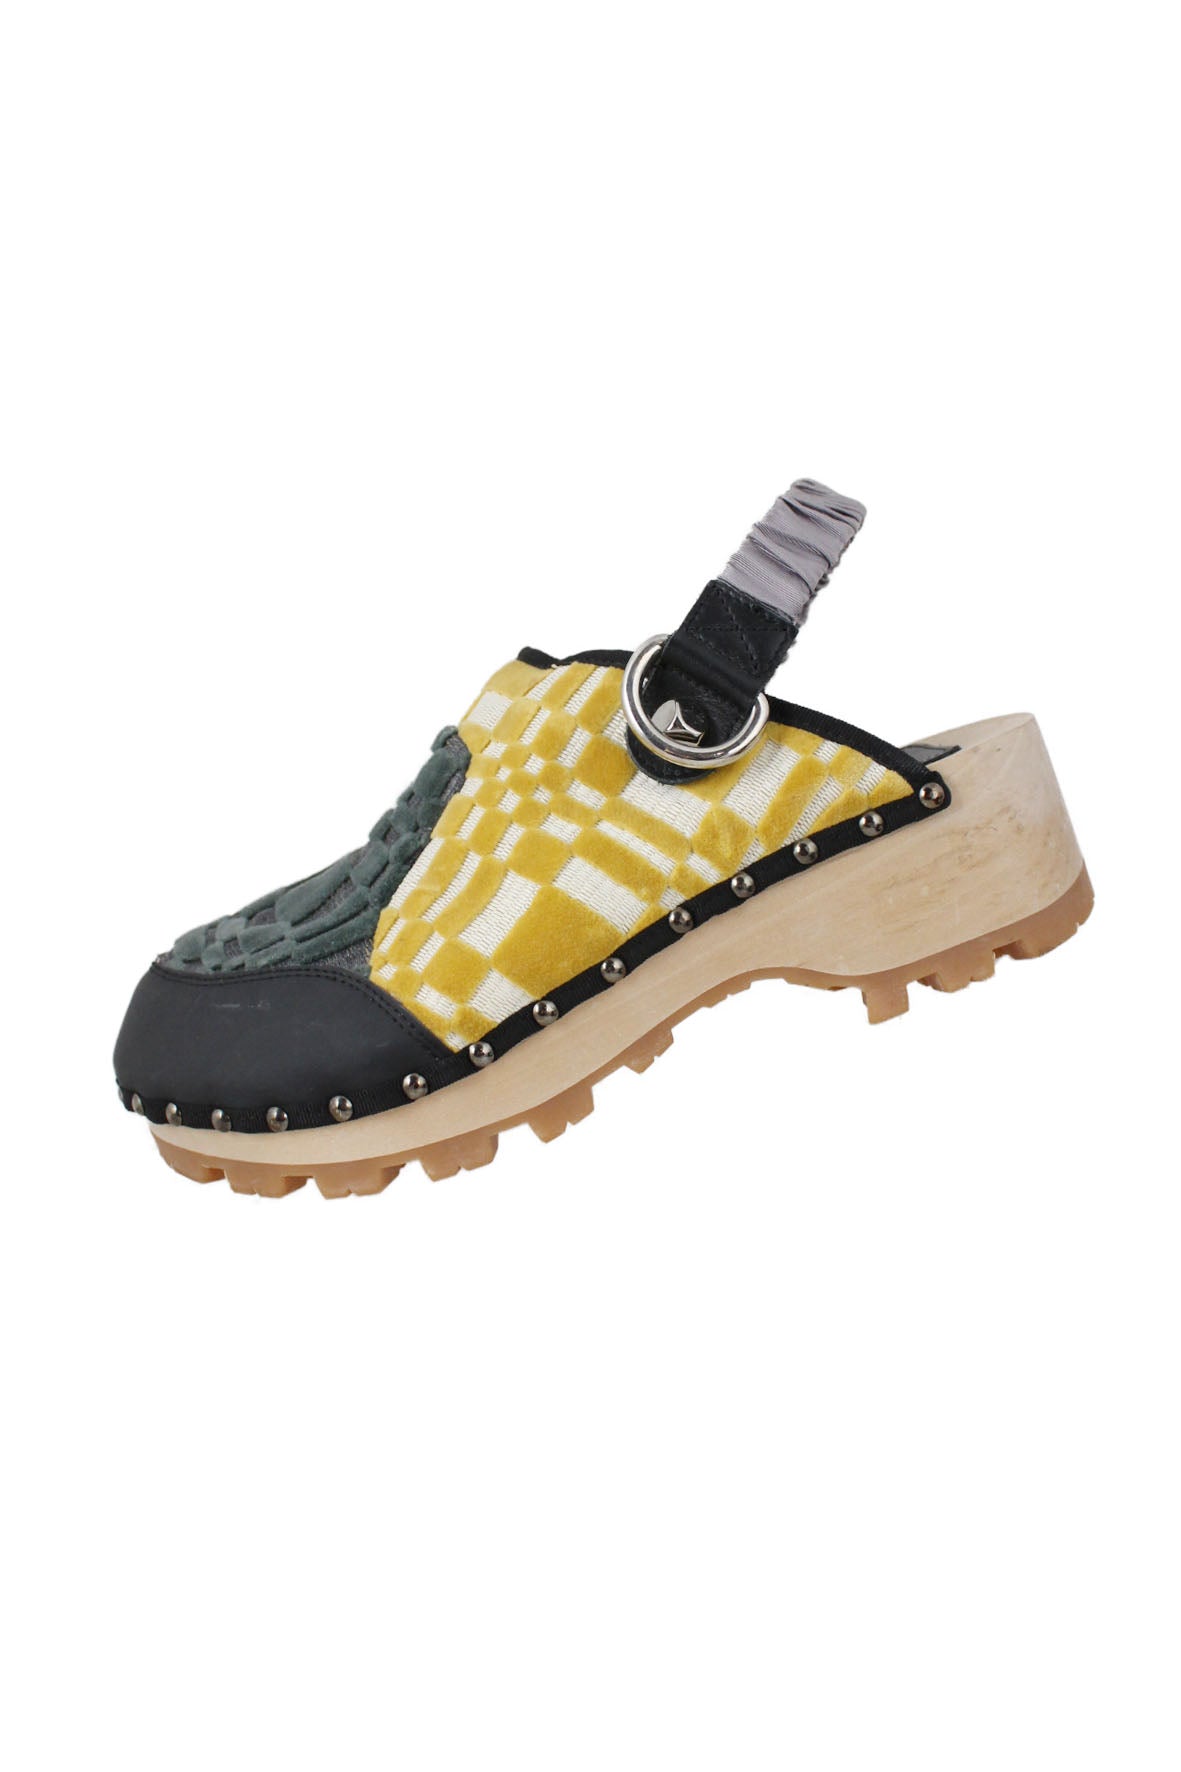 description: brain dead yellow and green checkered clogs. features rounded toe silhouette, silver-tone studs through hem, and elastic hem at ankle. 